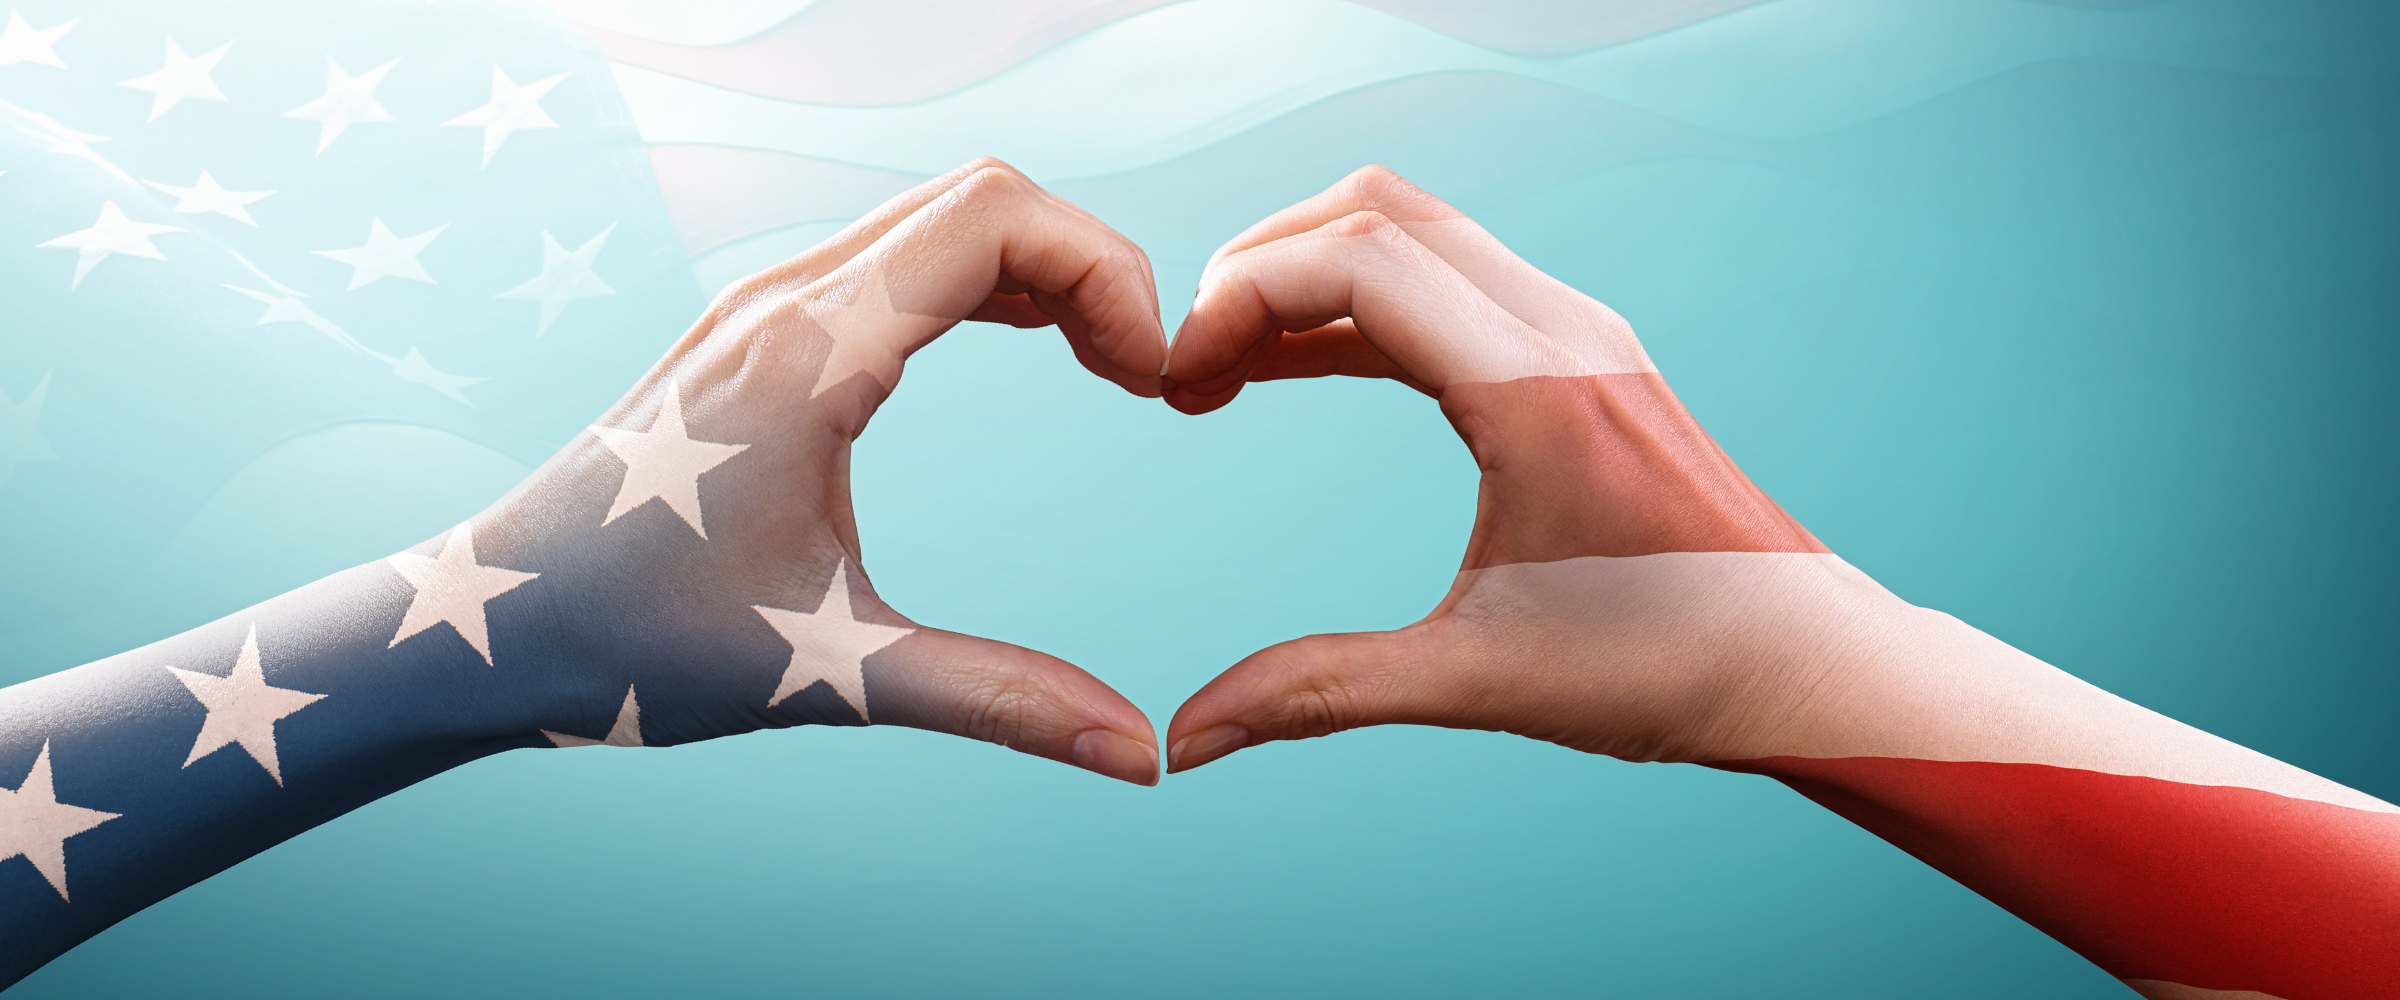 Hands making a heart shape colored as an American flag.